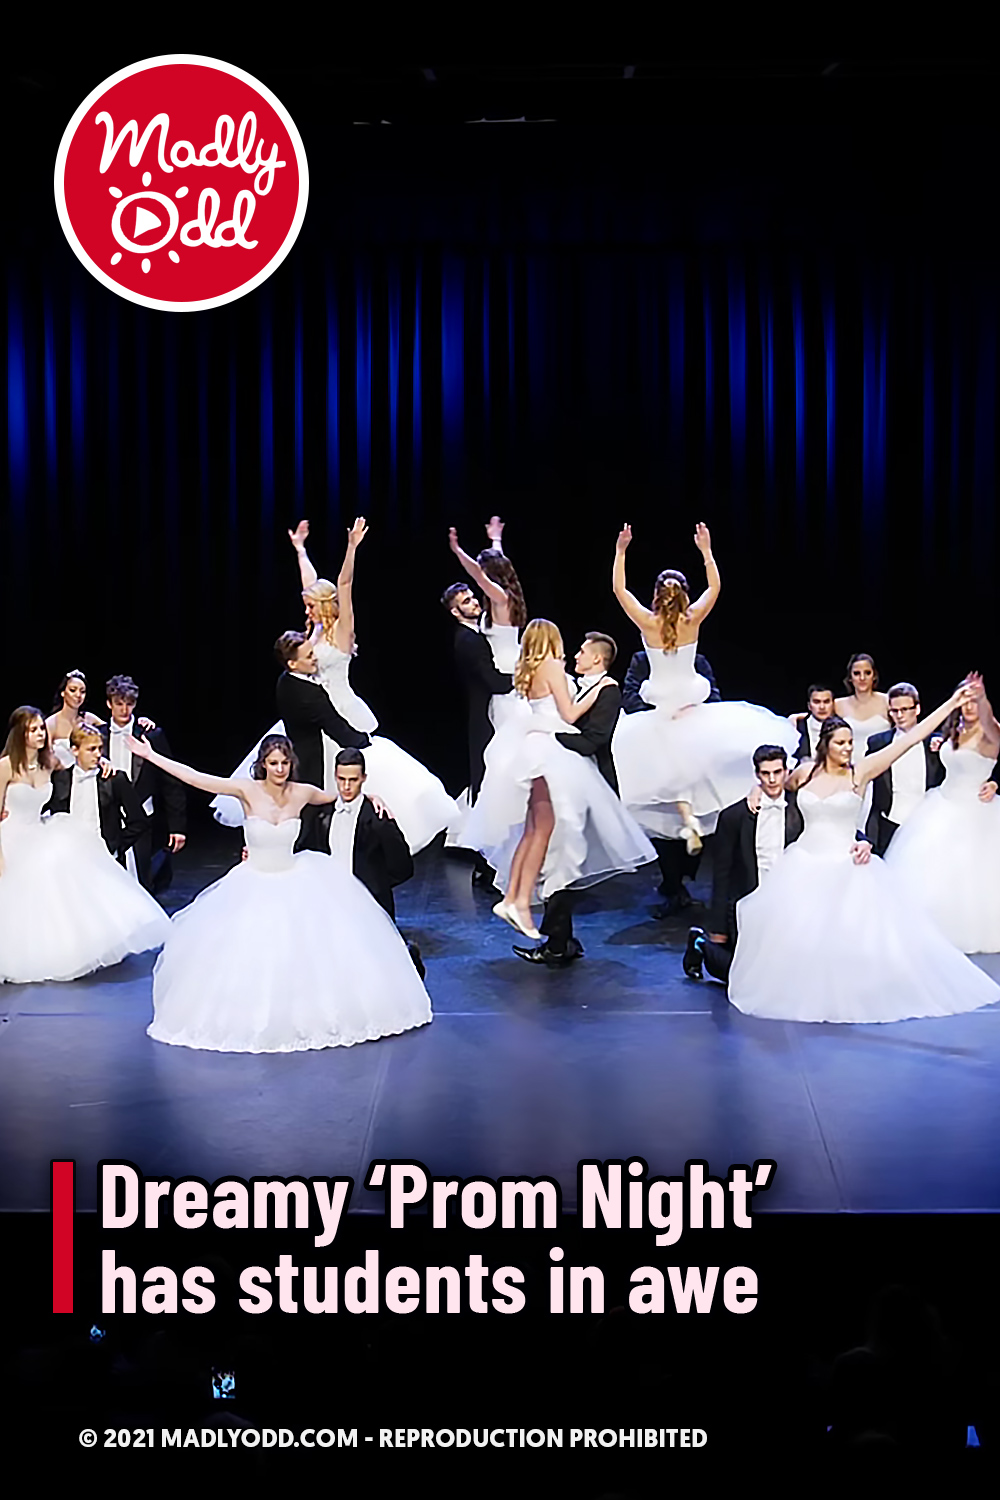 Dreamy ‘Prom Night’ has students in awe